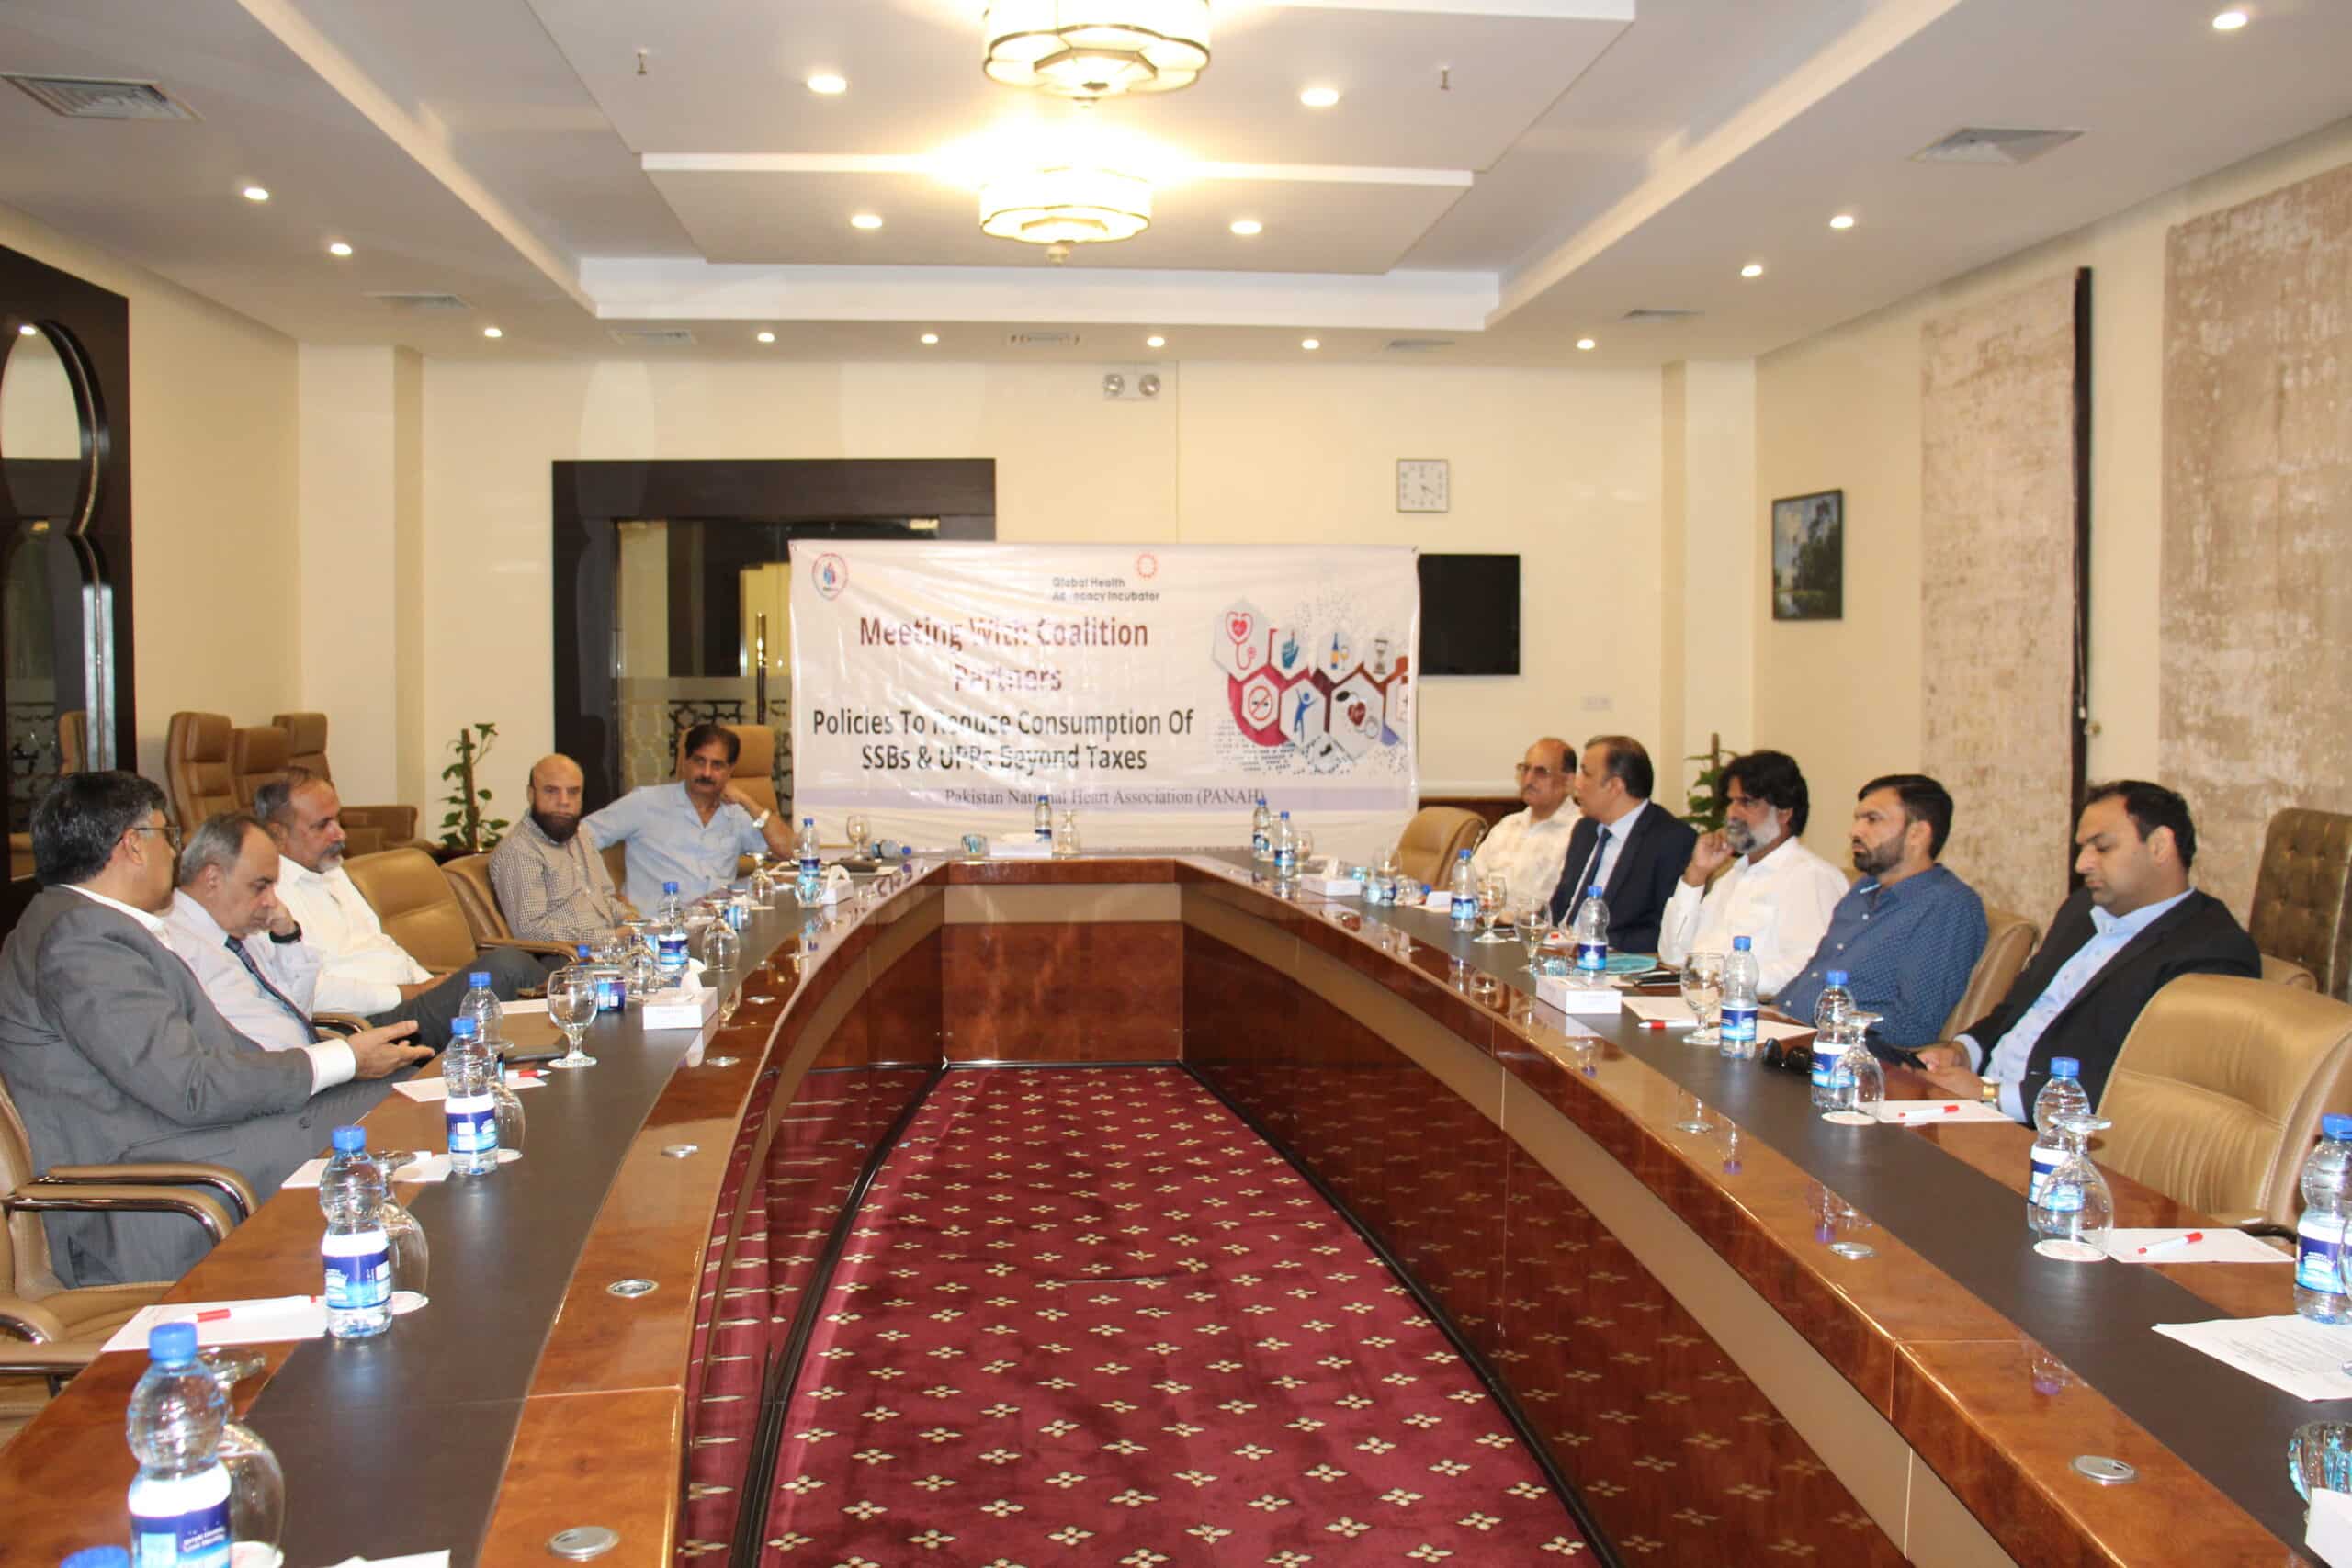 Panah Organized an Meeting with Coalition  Partners , Policies to Reduce Consumption of SSBs & UPPs Beyond Taxes   Venue : Ramada Hotel Islamabad